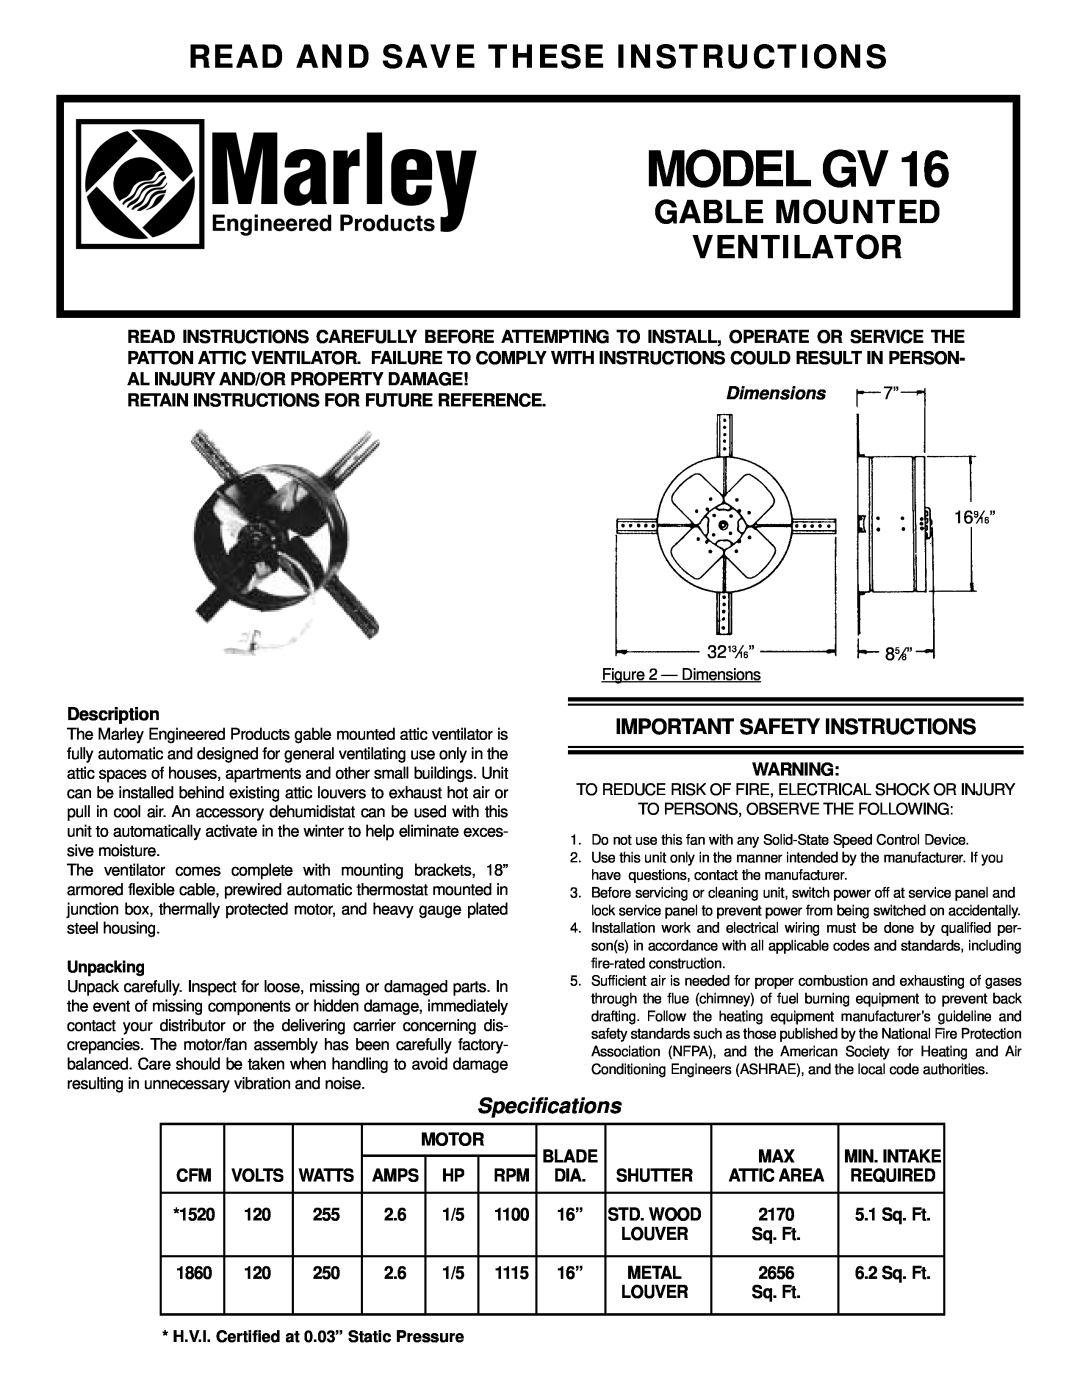 Marley Engineered Products GV 16 important safety instructions Read And Save These Instructions, Gable Mounted Ventilator 